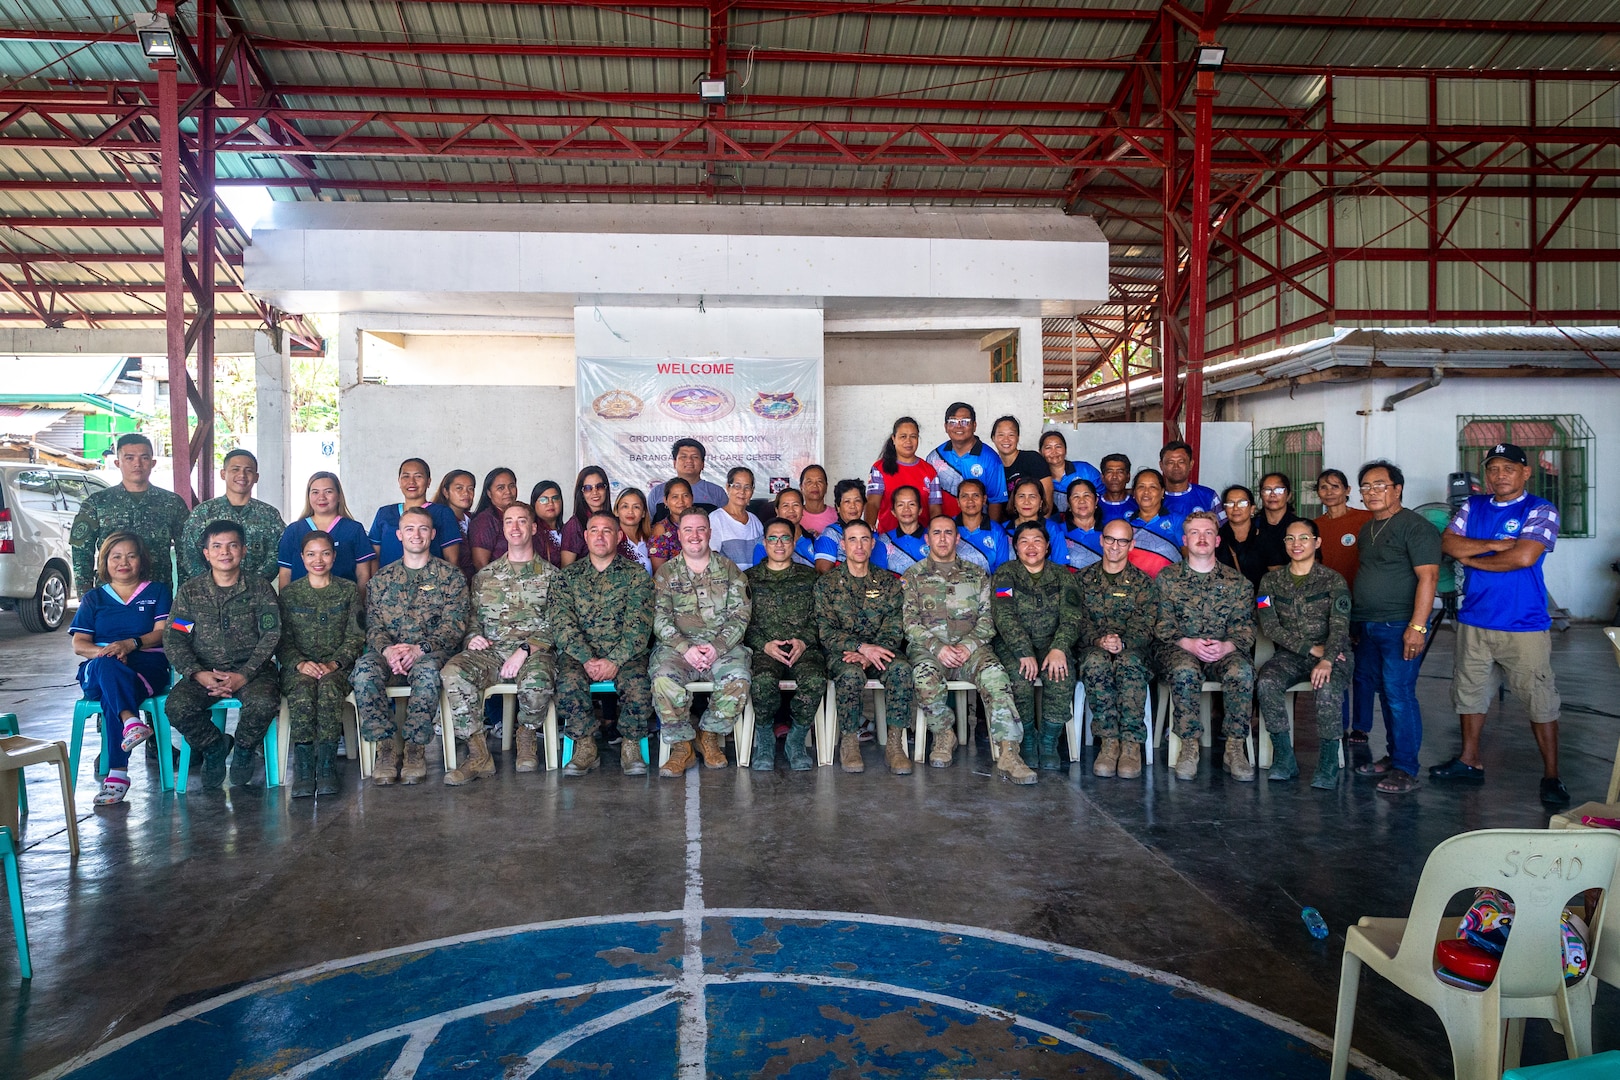 Philippine and U.S. service members with the Combined Joint Civil-Military Operations Task Force pose for a photograph with local healthcare workers and Ilocos Norte residents after a community health engagement held before Exercise Balikatan 24 at Davila Elementary School in Pasuquin, Ilocos Norte, Philippines, April 21, 2024. The Philippine and U.S. service members trained Ilocos Norte healthcare workers and residents on basic lifesaving skills such as cardiopulmonary resuscitation and tactical combat casualty care, increasing emergency care access and awareness. BK 24 is an annual exercise between the Armed Forces of the Philippines and the U.S. military designed to strengthen bilateral interoperability, capabilities, trust, and cooperation built over decades of shared experiences. (U.S. Marine Corps photo by Cpl. Trent A. Henry)